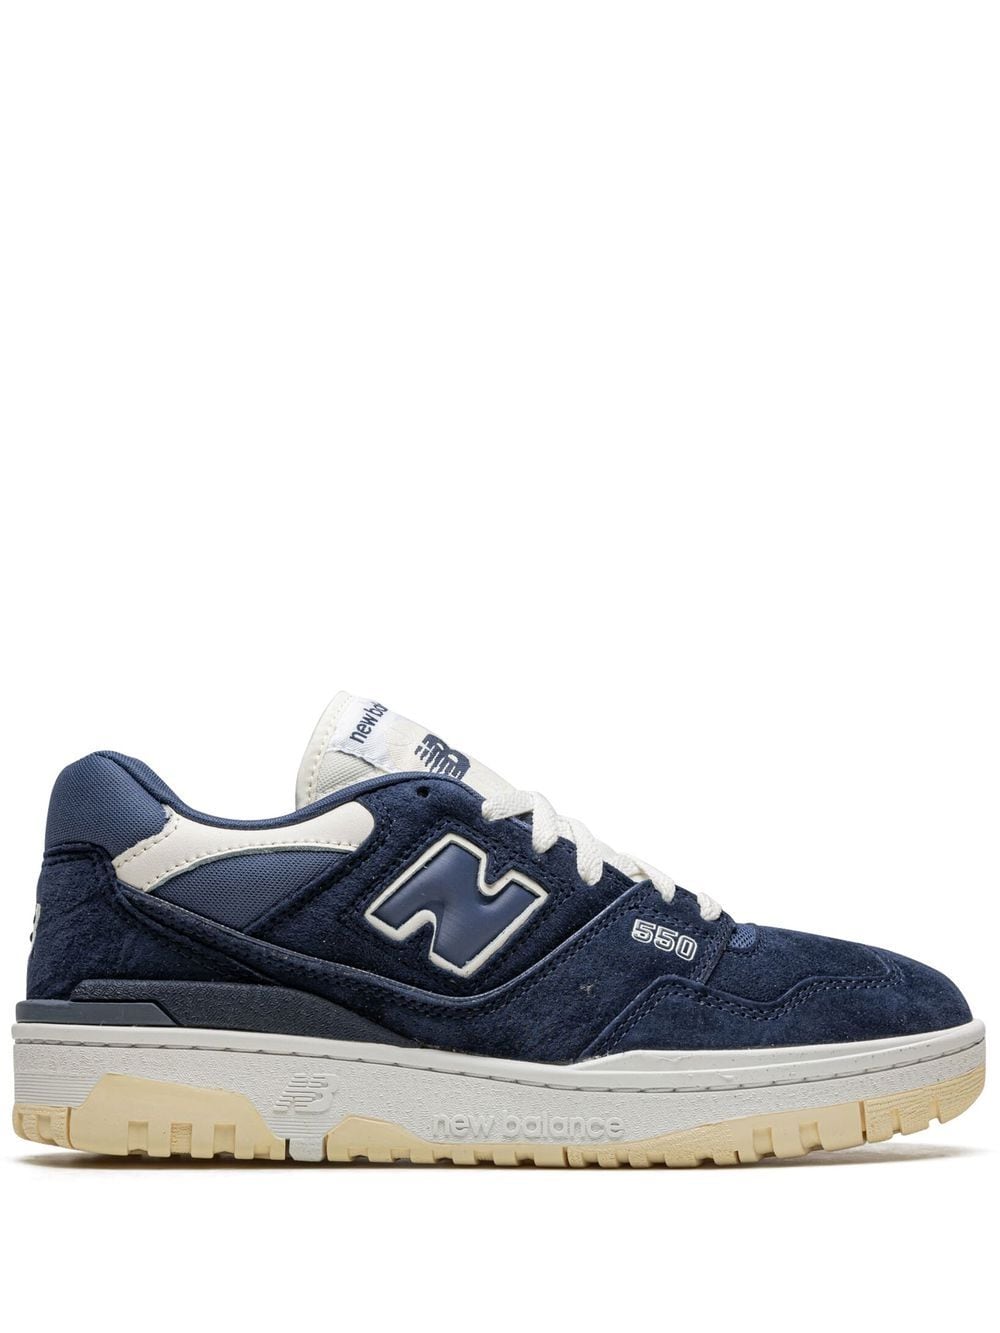 New Balance 550 low-top sneakers - Blue